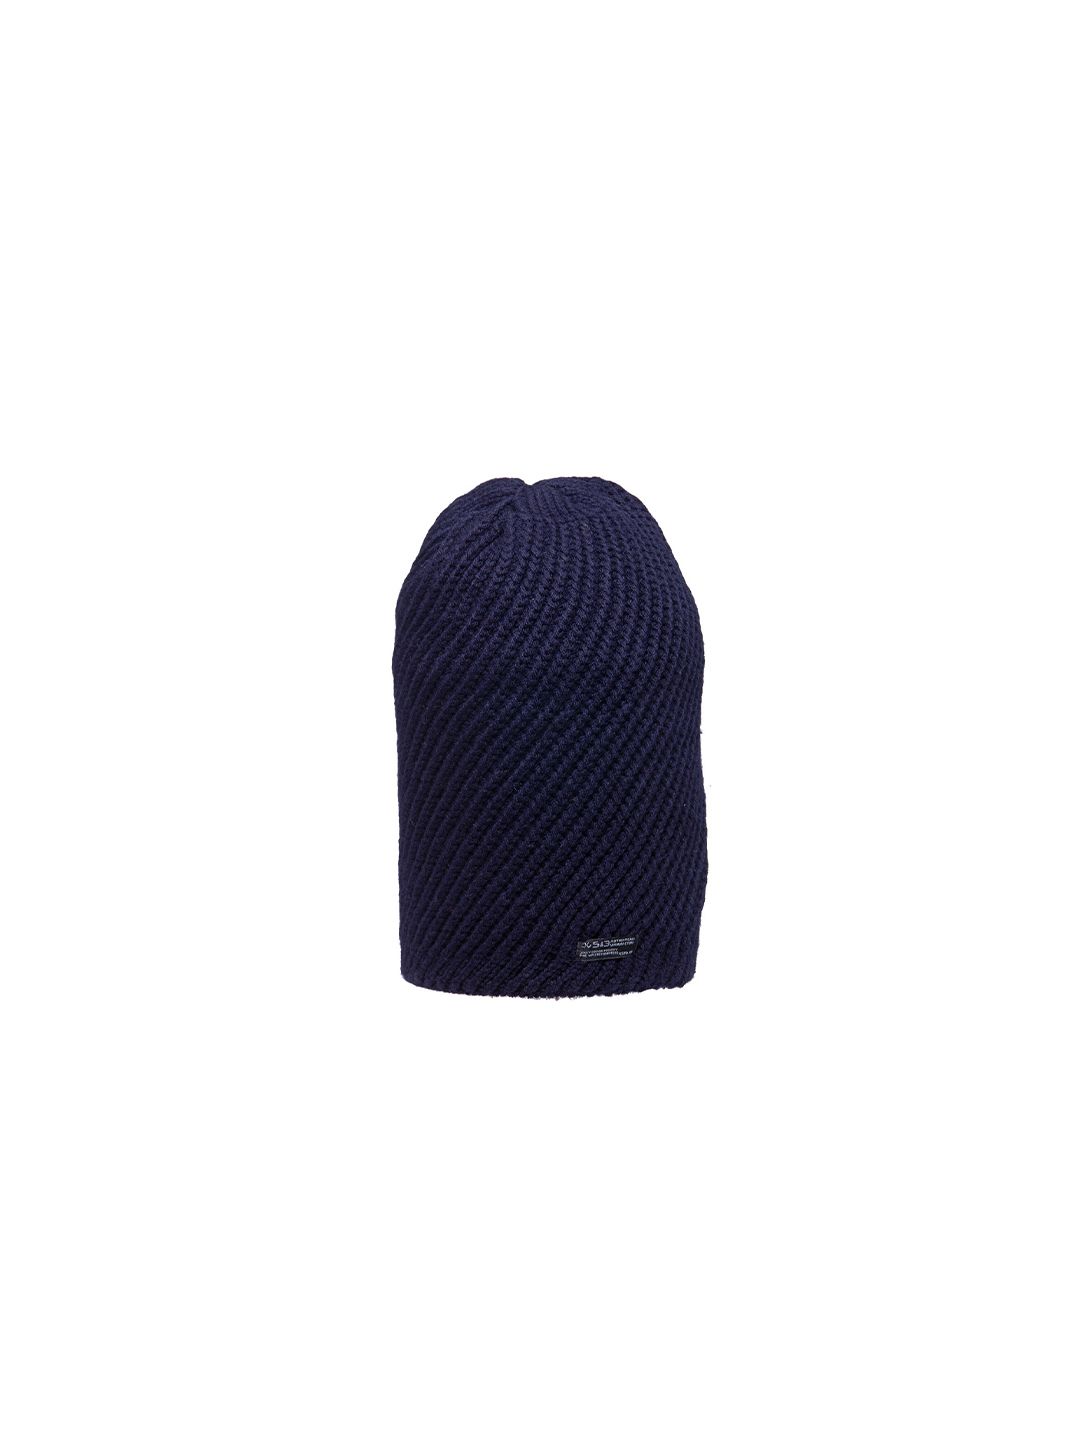 513 Women Navy Blue Knitted Beanie Price in India